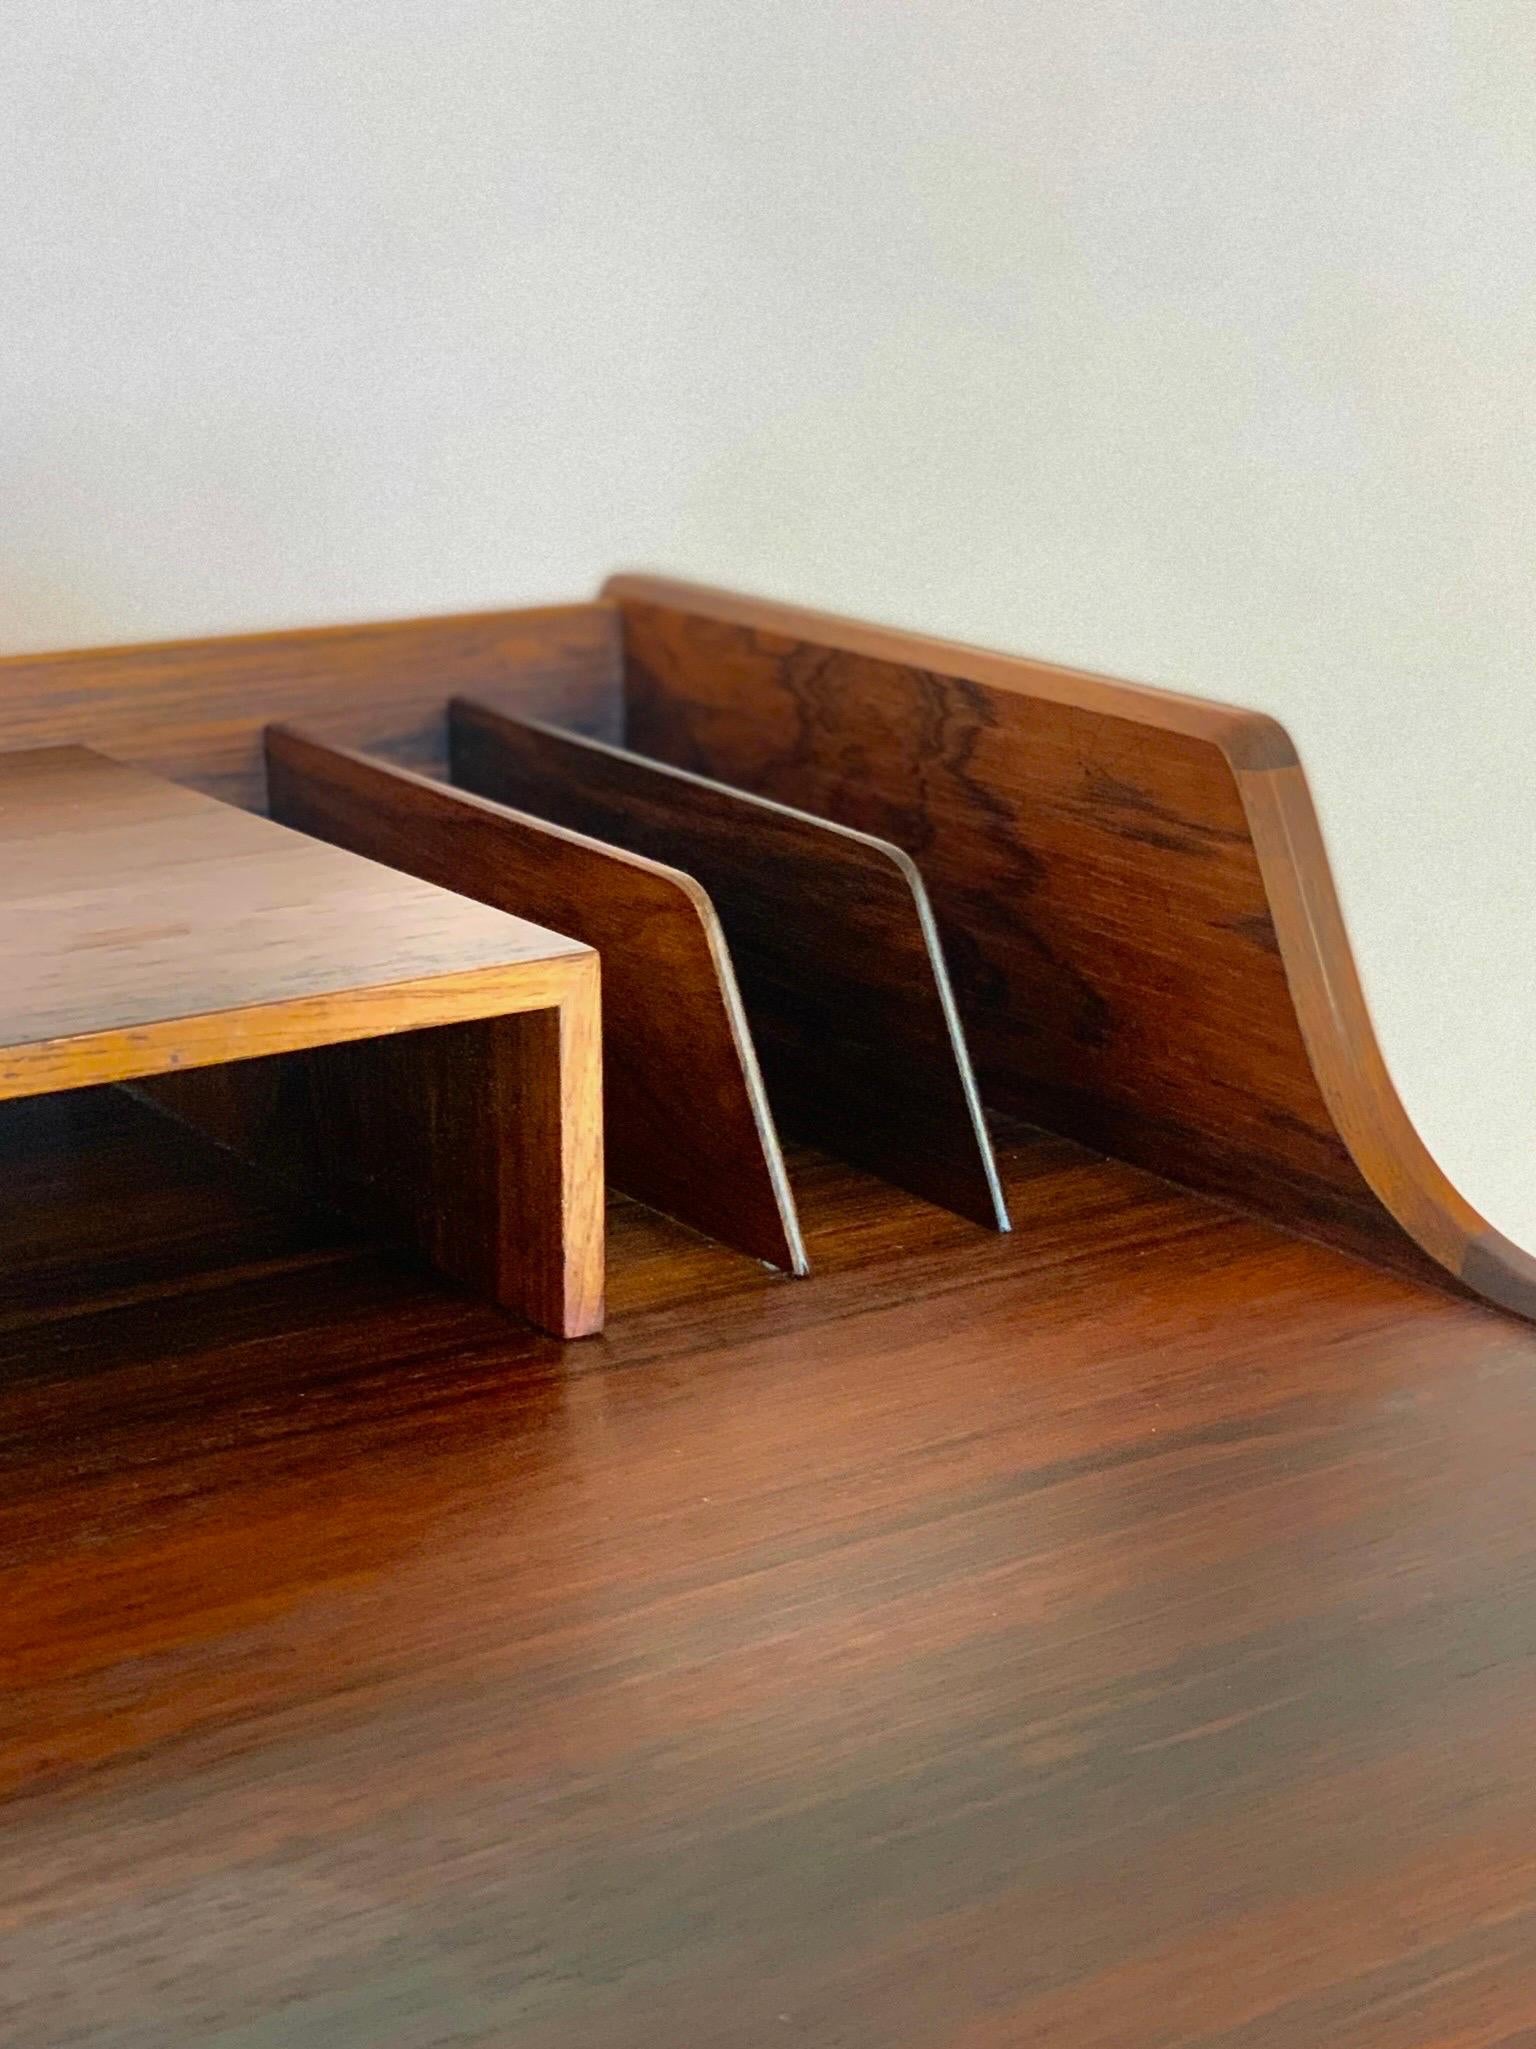 A rare desk designed by Arne Wahl Iversen. Made in Denmark during the 1950s. It features an organic shape with a wide table top with raised edges.  In the front side two generous drawers offers plenty of storage space. It can be elegantly used as a